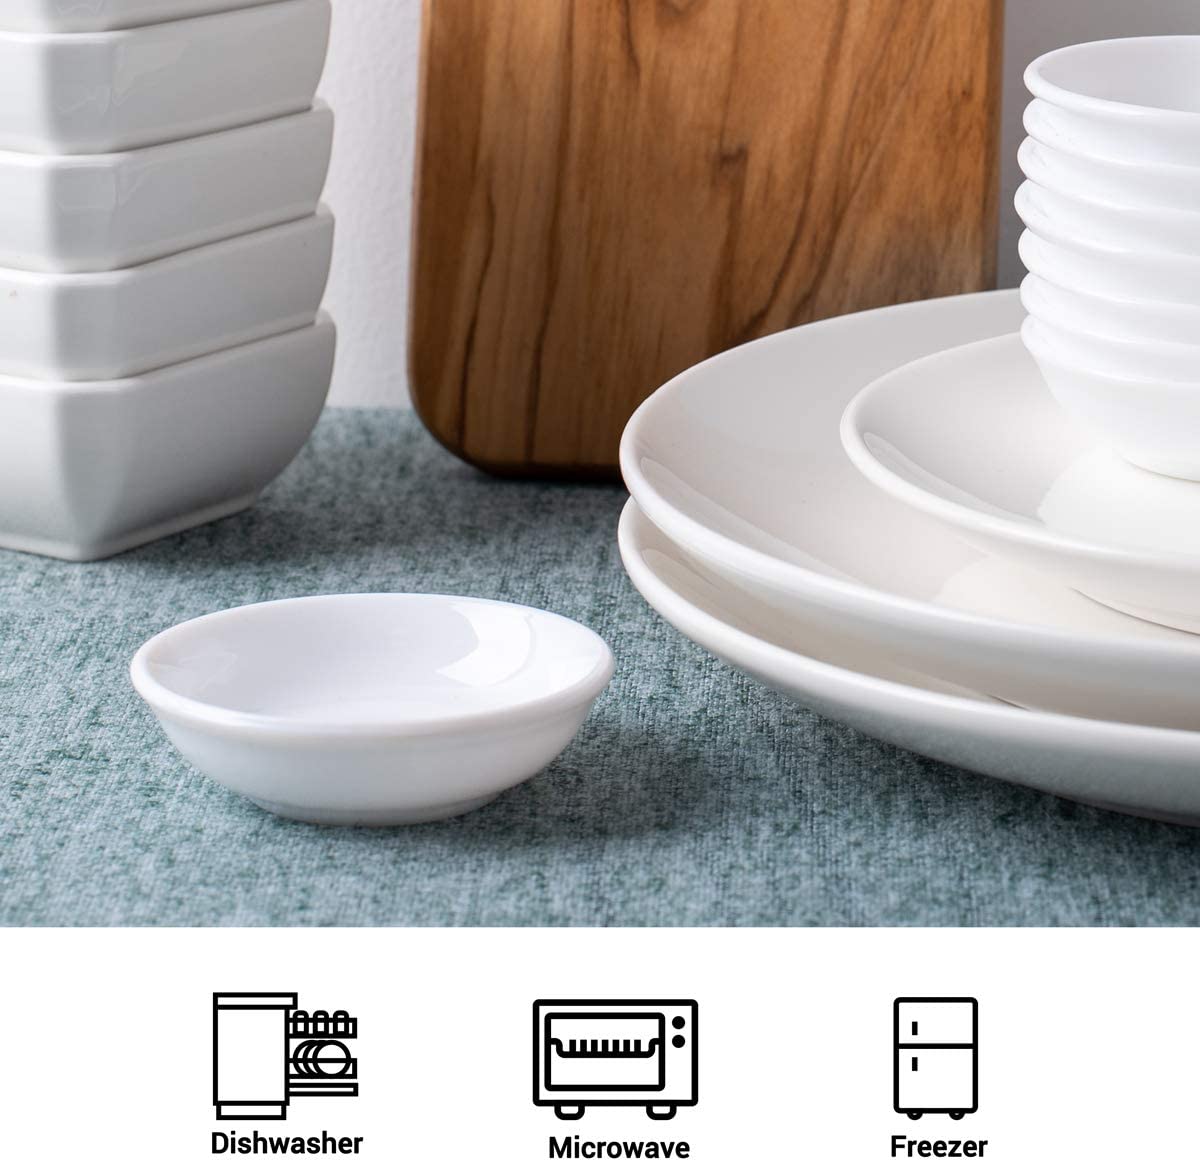 Dipping Bowls Sets of 12- Delling 1.2 Oz Porcelain Dip Soy Sauce Dishes & Bowl Small Cups for Sushi Tomato Sauce, Soy, BBQ -Chip and Dip Serving Bowl Set,White